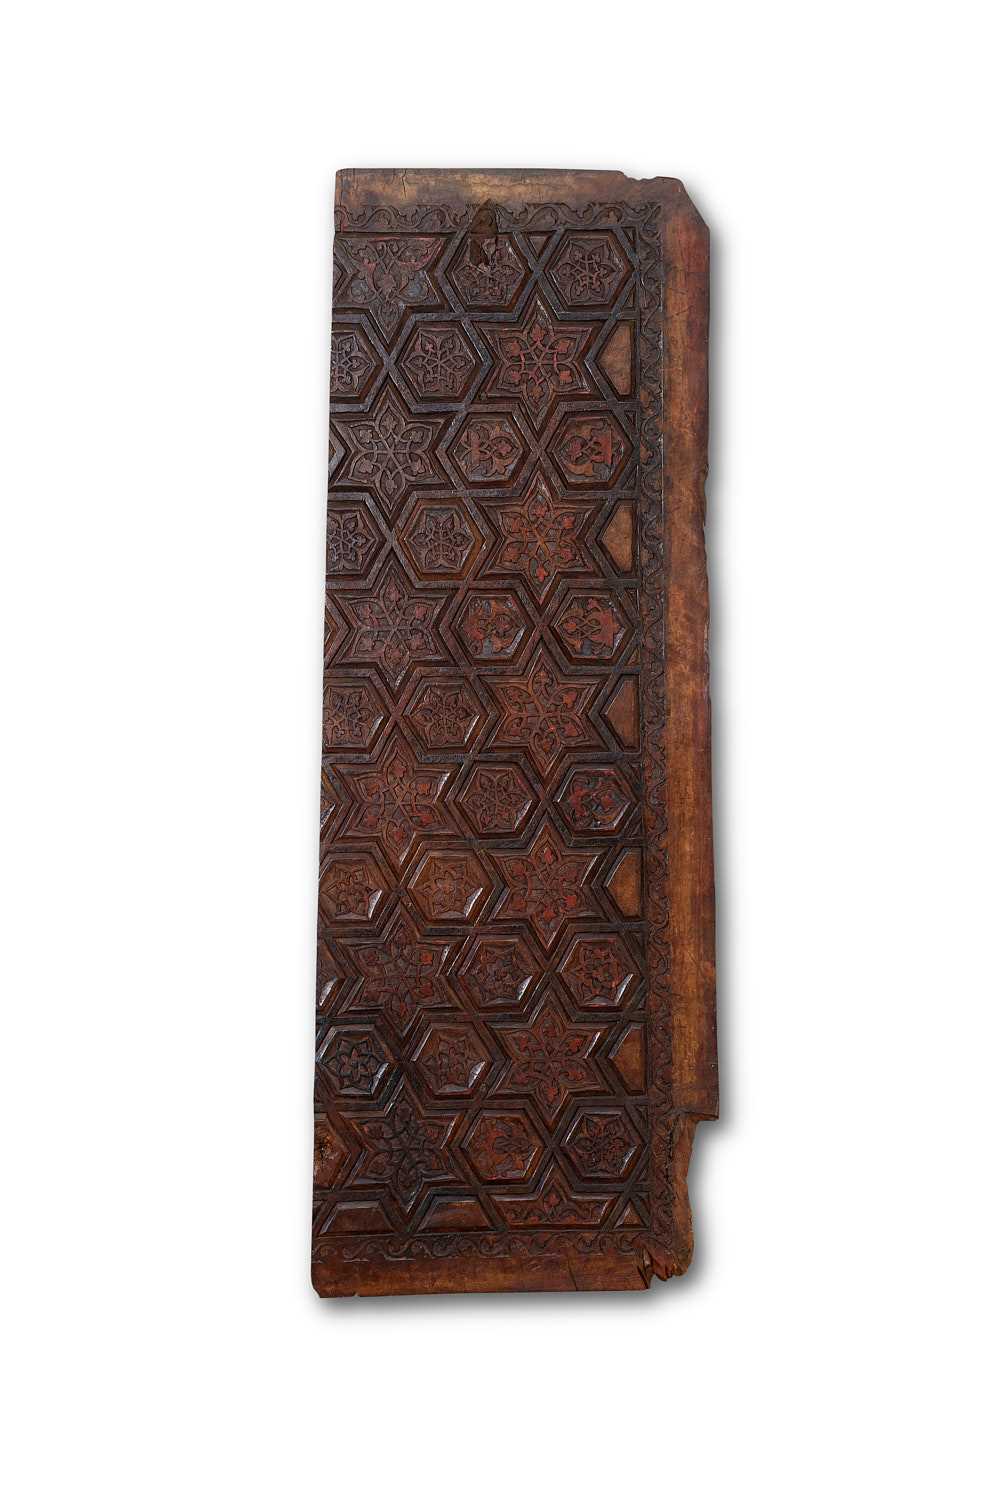 A 16TH / 17TH CENTURY PERSIAN SAFAVID CARVED WOOD DOOR PANEL